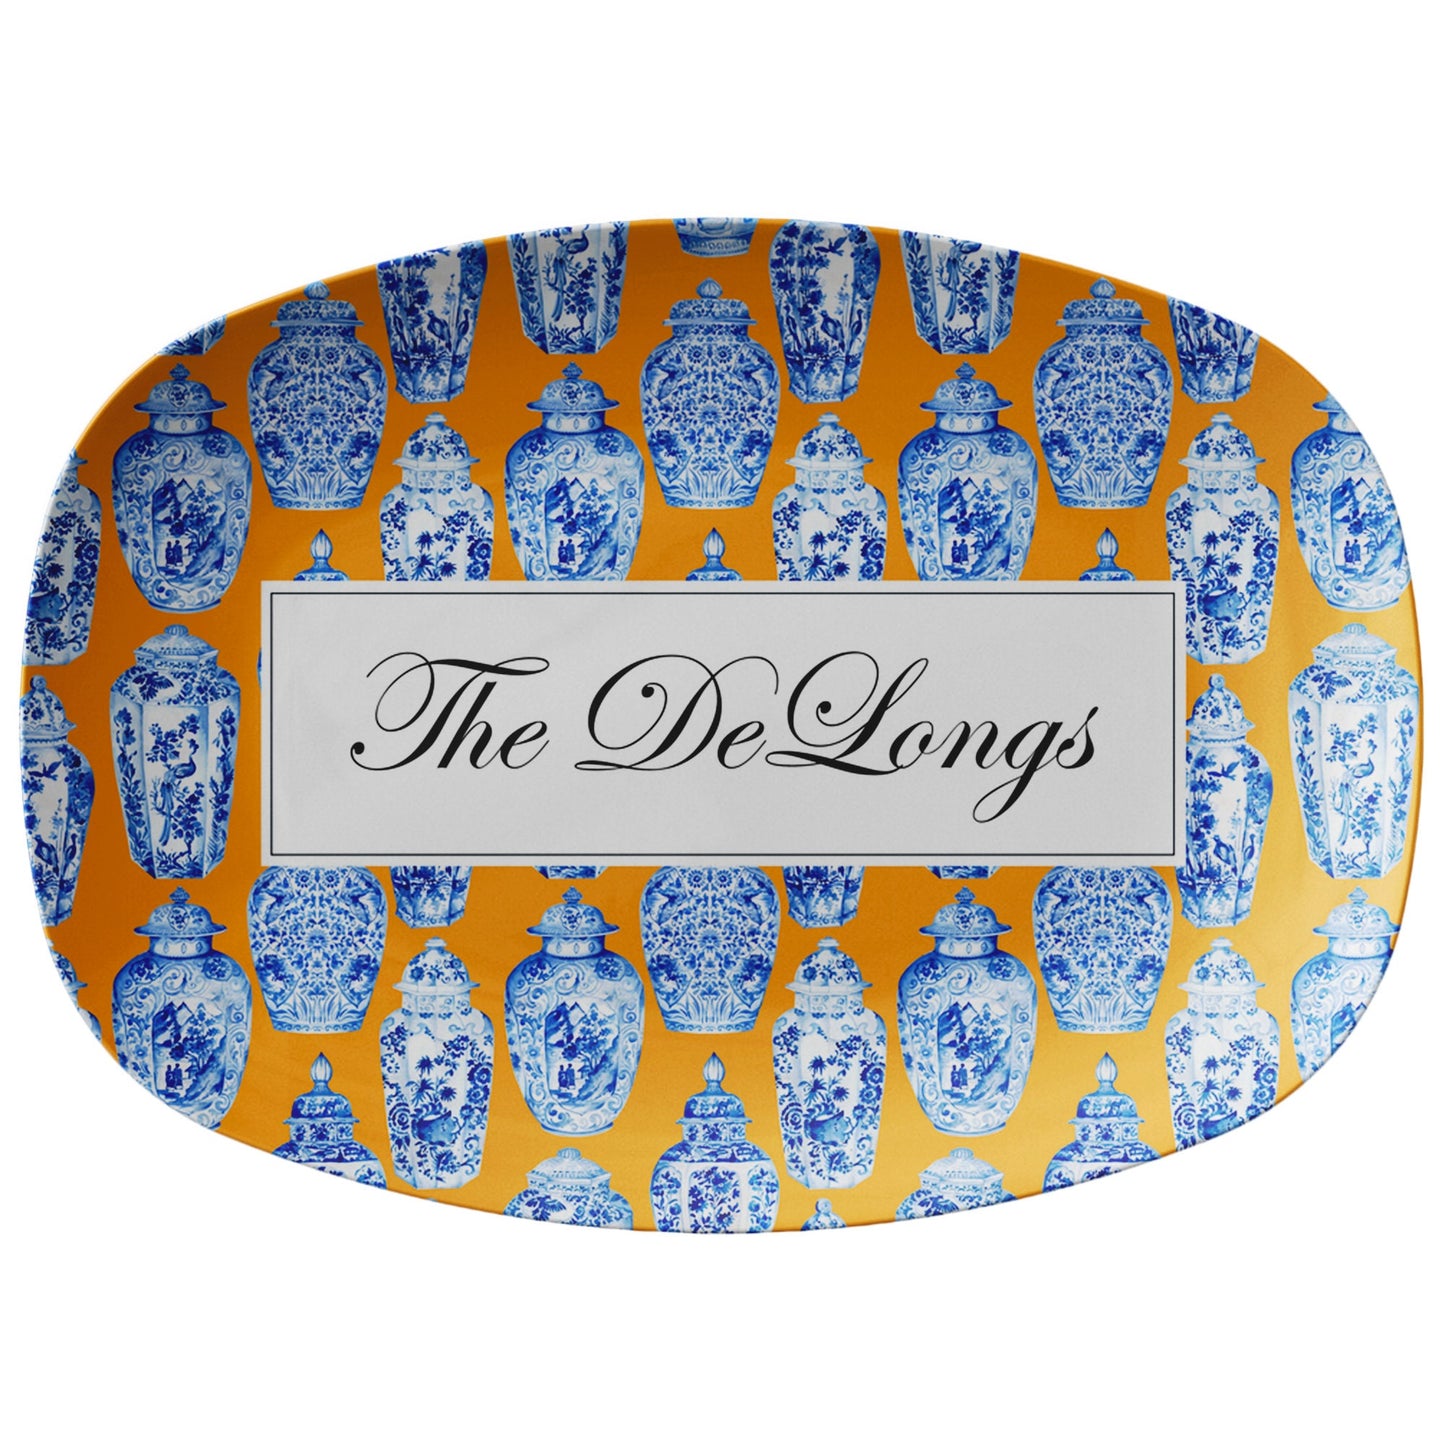 Chinoiserie inspired platter in blue, orange and white has ginger jars printed on it and can be personalized with any name or word.